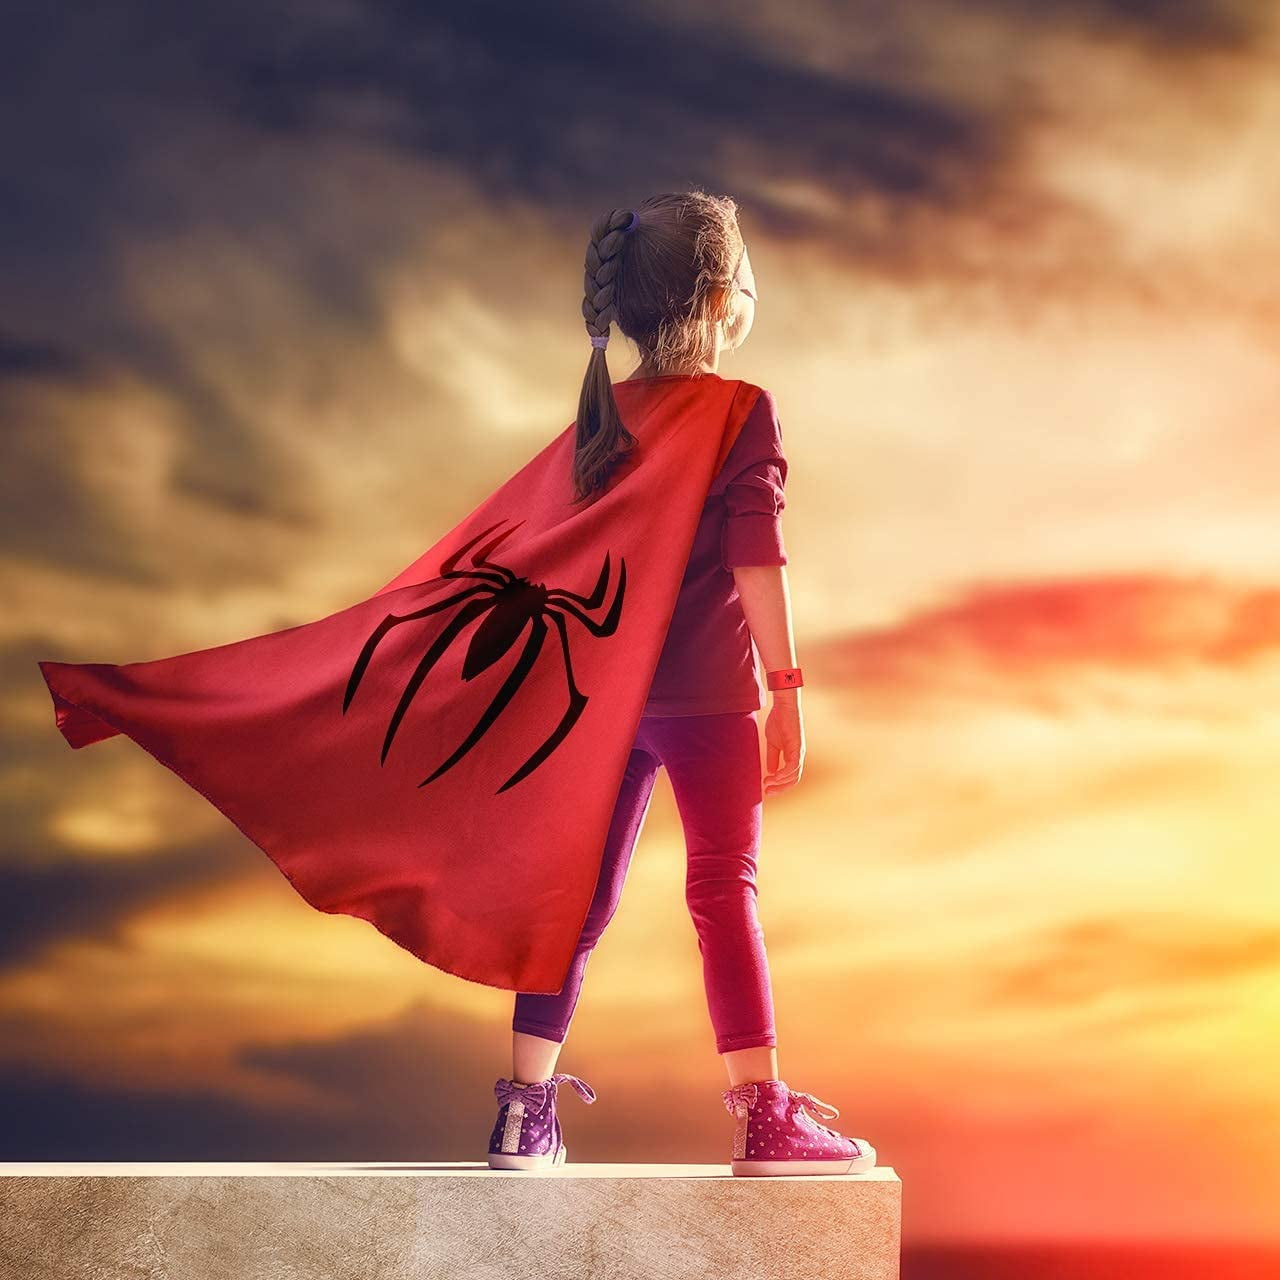 Superhero Capes for Kids Toys for 3-9 Year Old Boys Gifts Kids Dress up Super Hero Costumes 